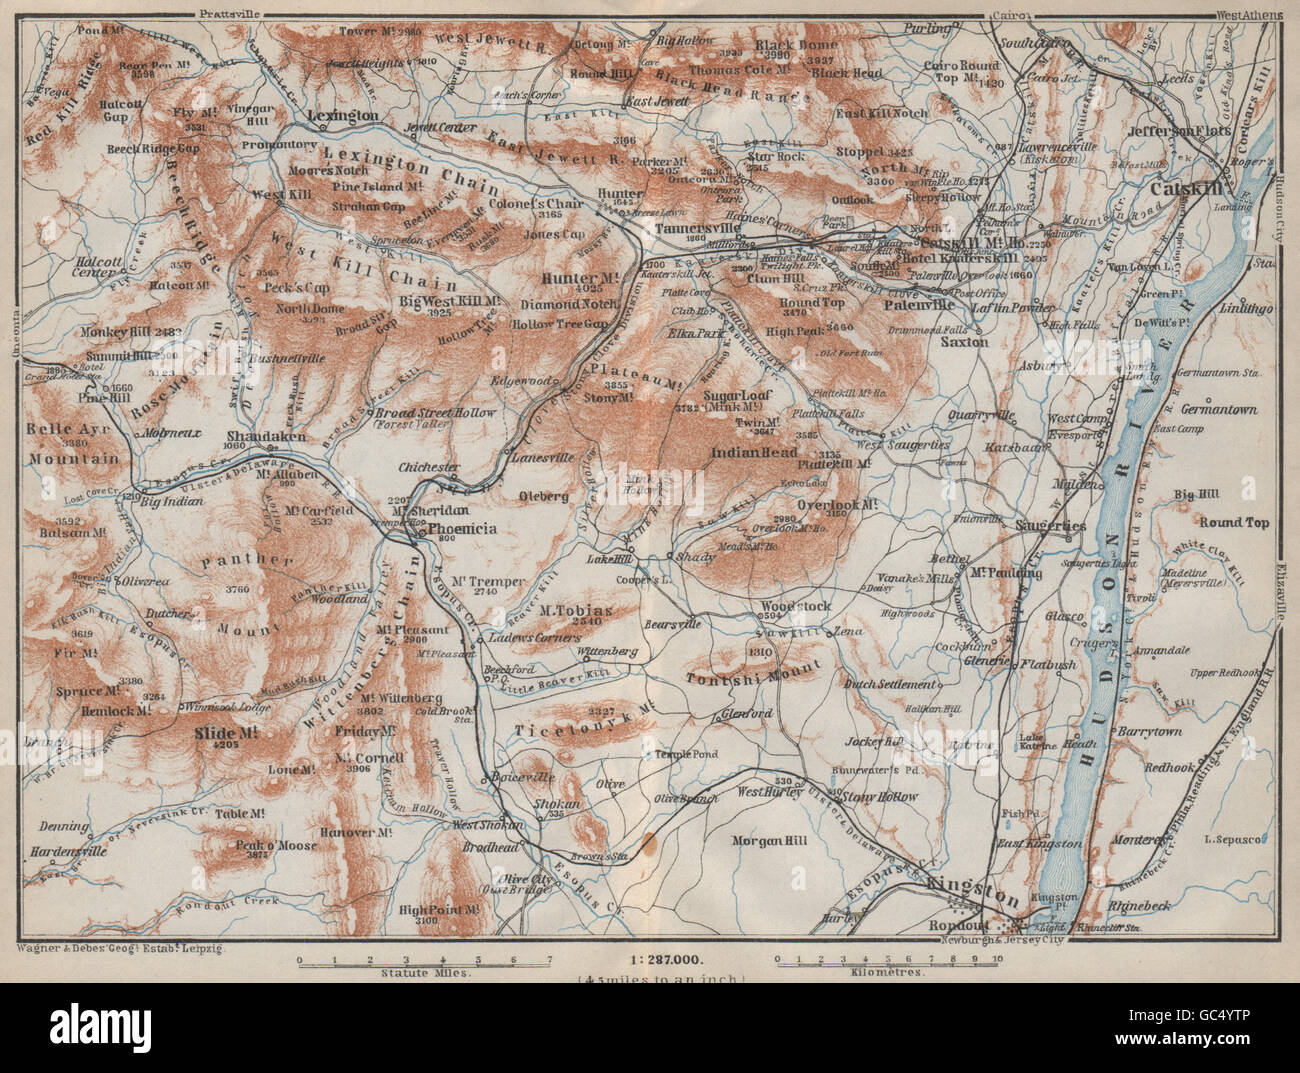 THE CATSKILL MOUNTAINS . New York State. Hudson River. BAEDEKER, 1909 old map Stock Photo